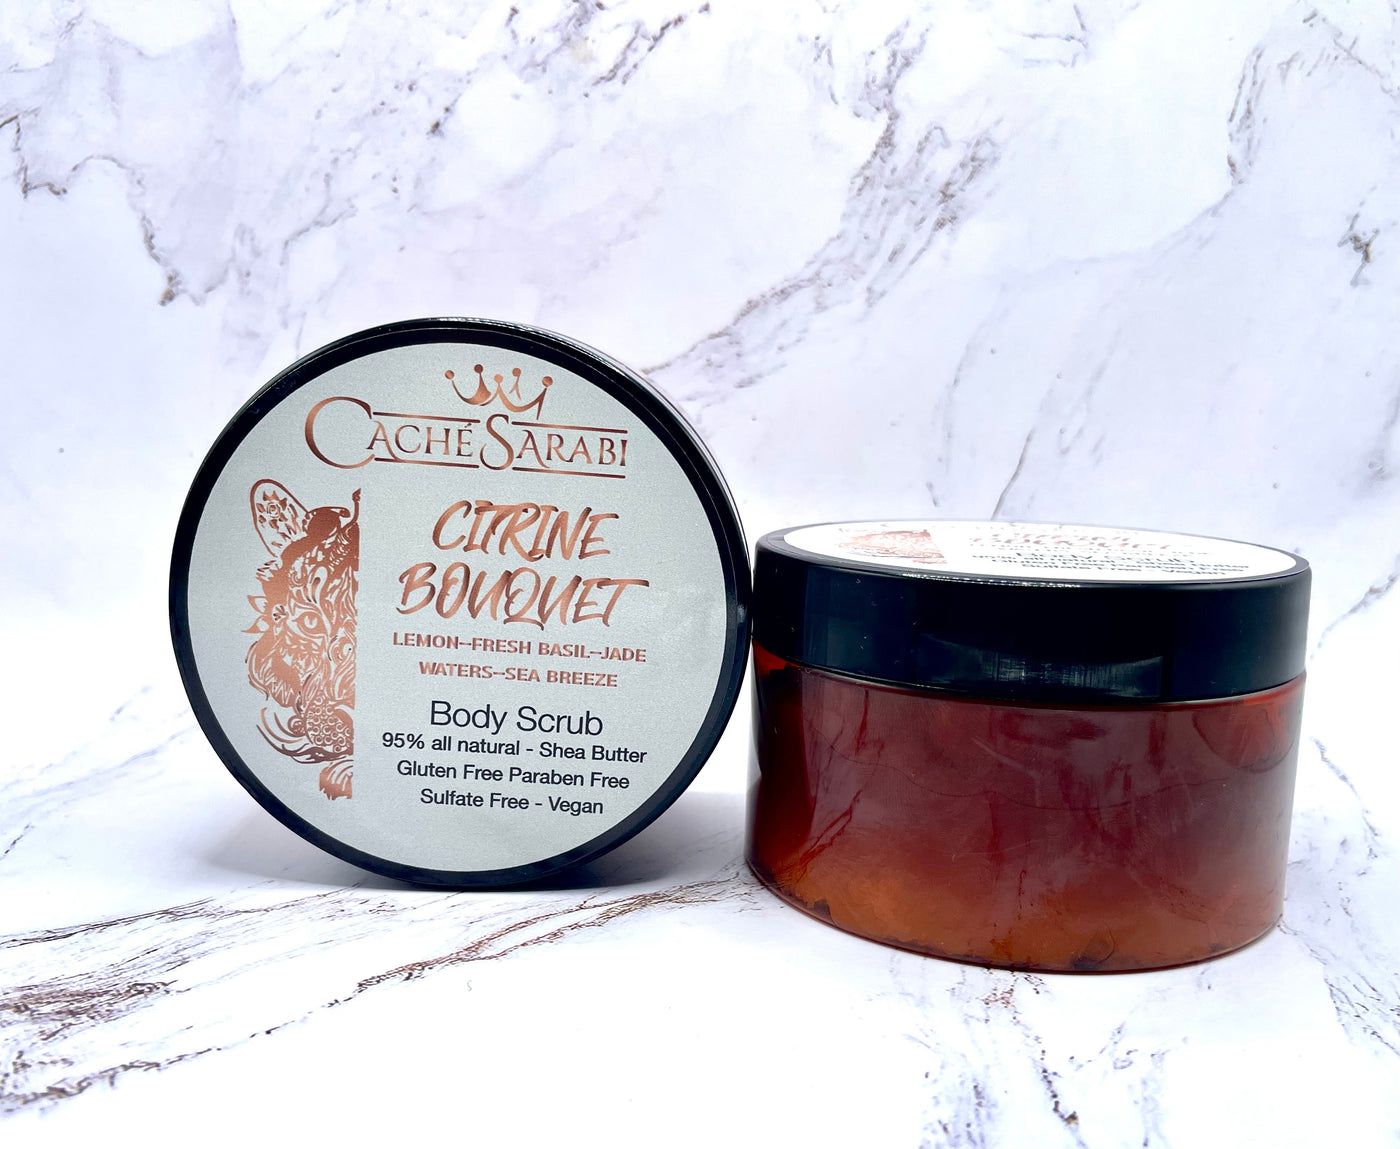  This body scrub offers luxurious exfoliation, for supple, soft skin. Its formula includes a variety of scents that provide a calming and indulgent spa experience. Pamper yourself with this exclusive formulation and enjoy smooth skin like never before.